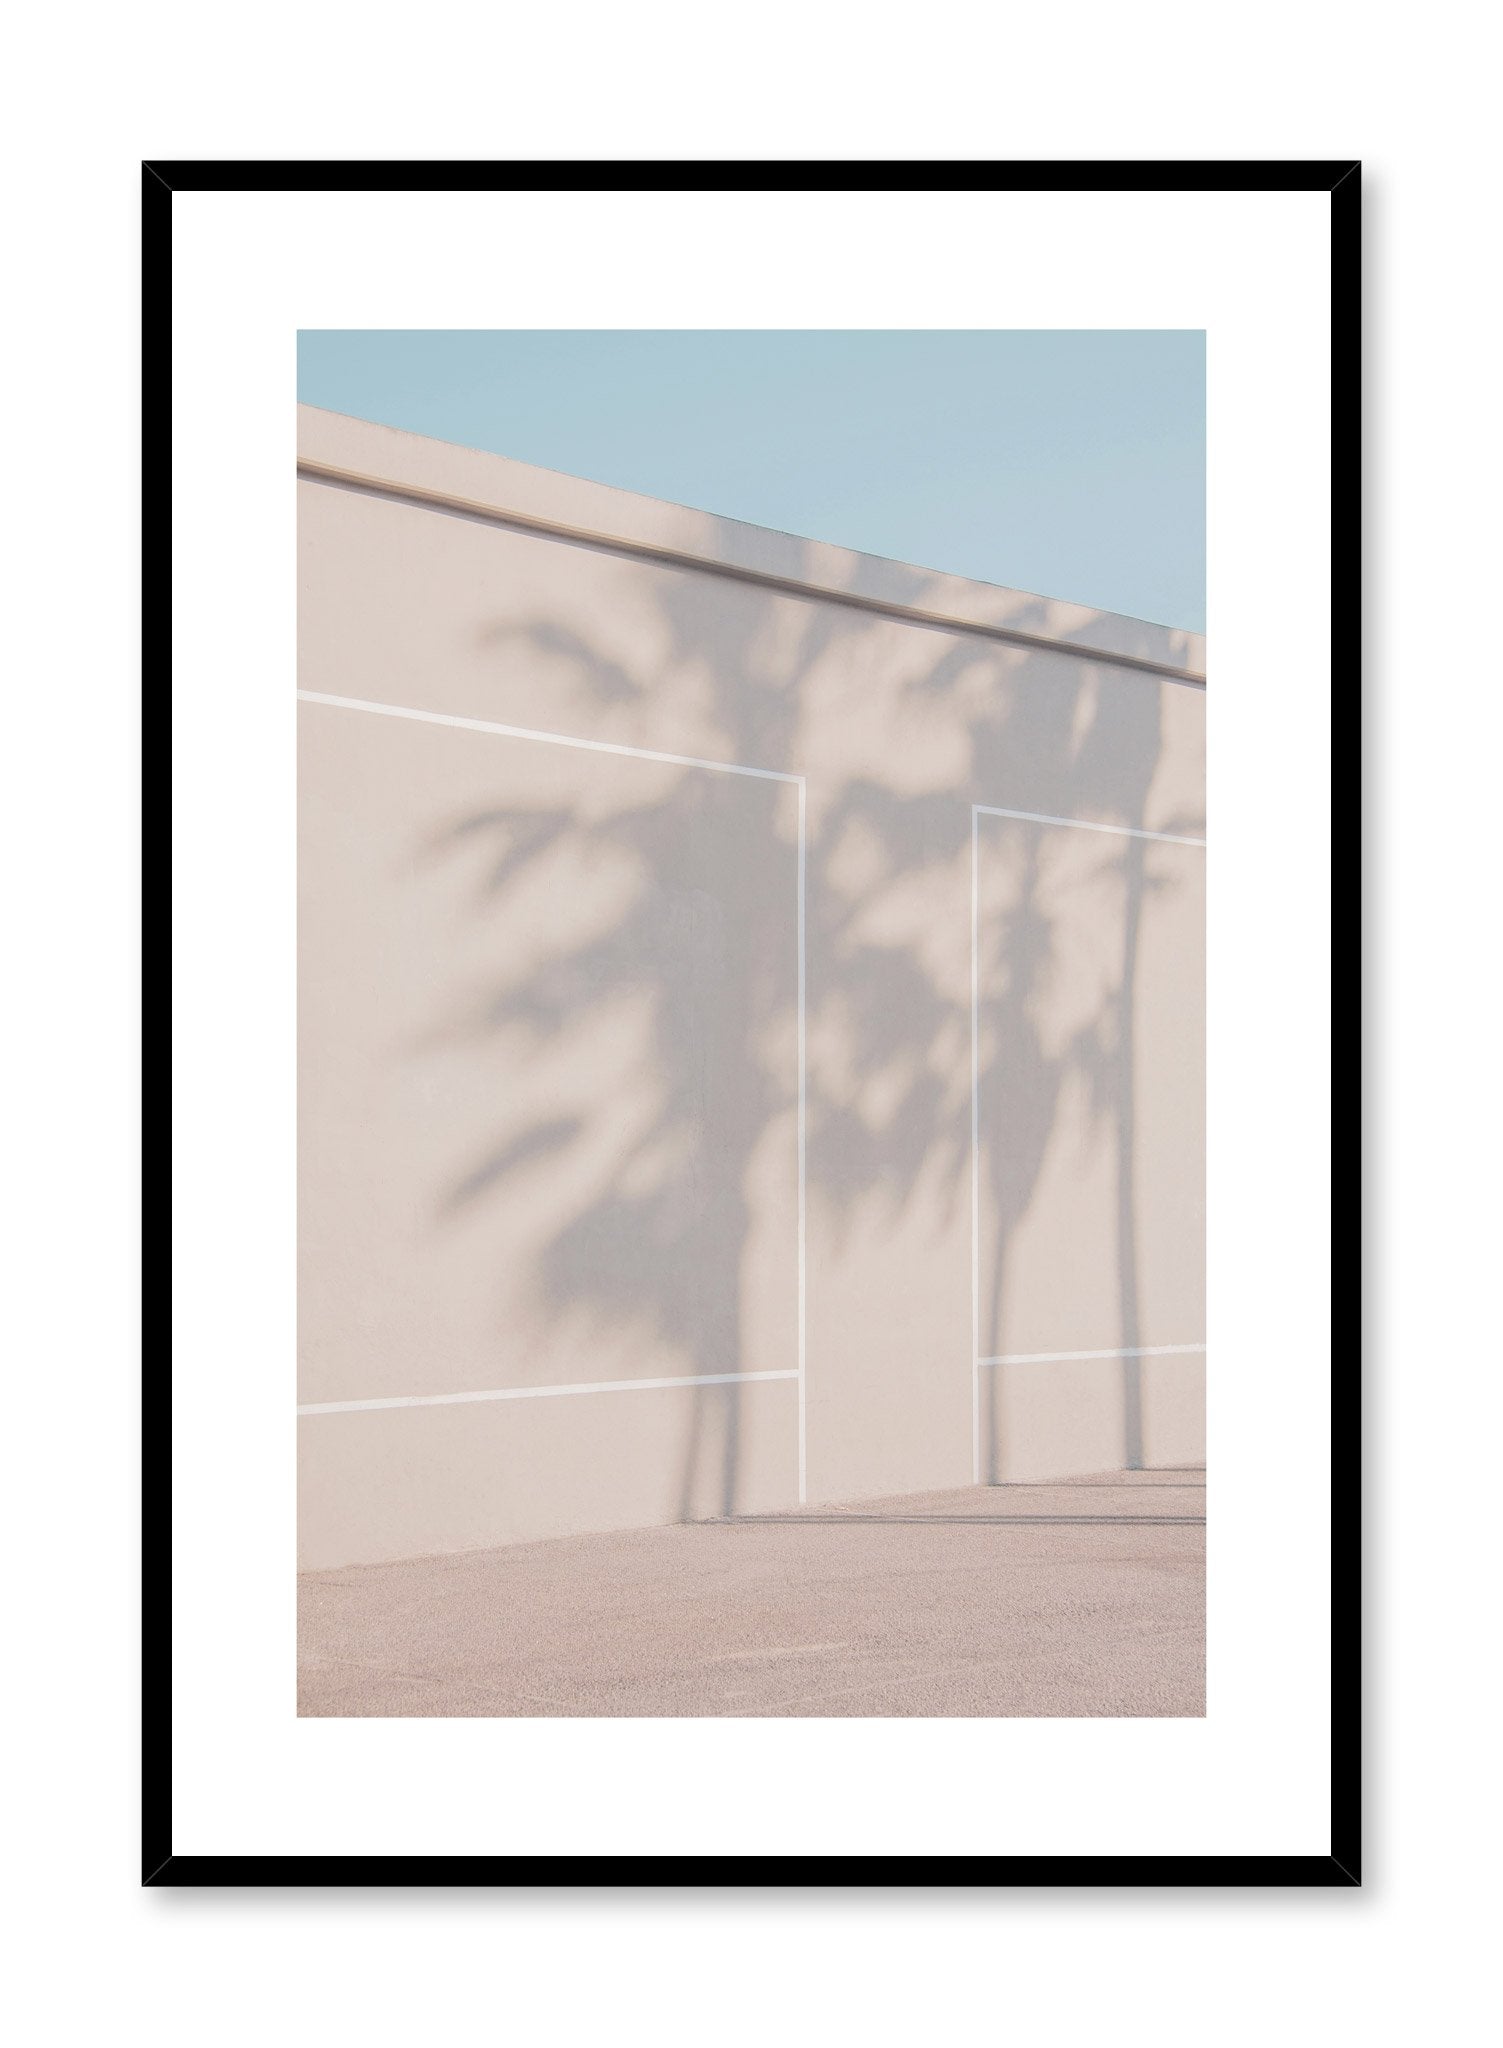 Modern minimalist poster by Opposite Wall with photography of beige wall and palm tree shadows